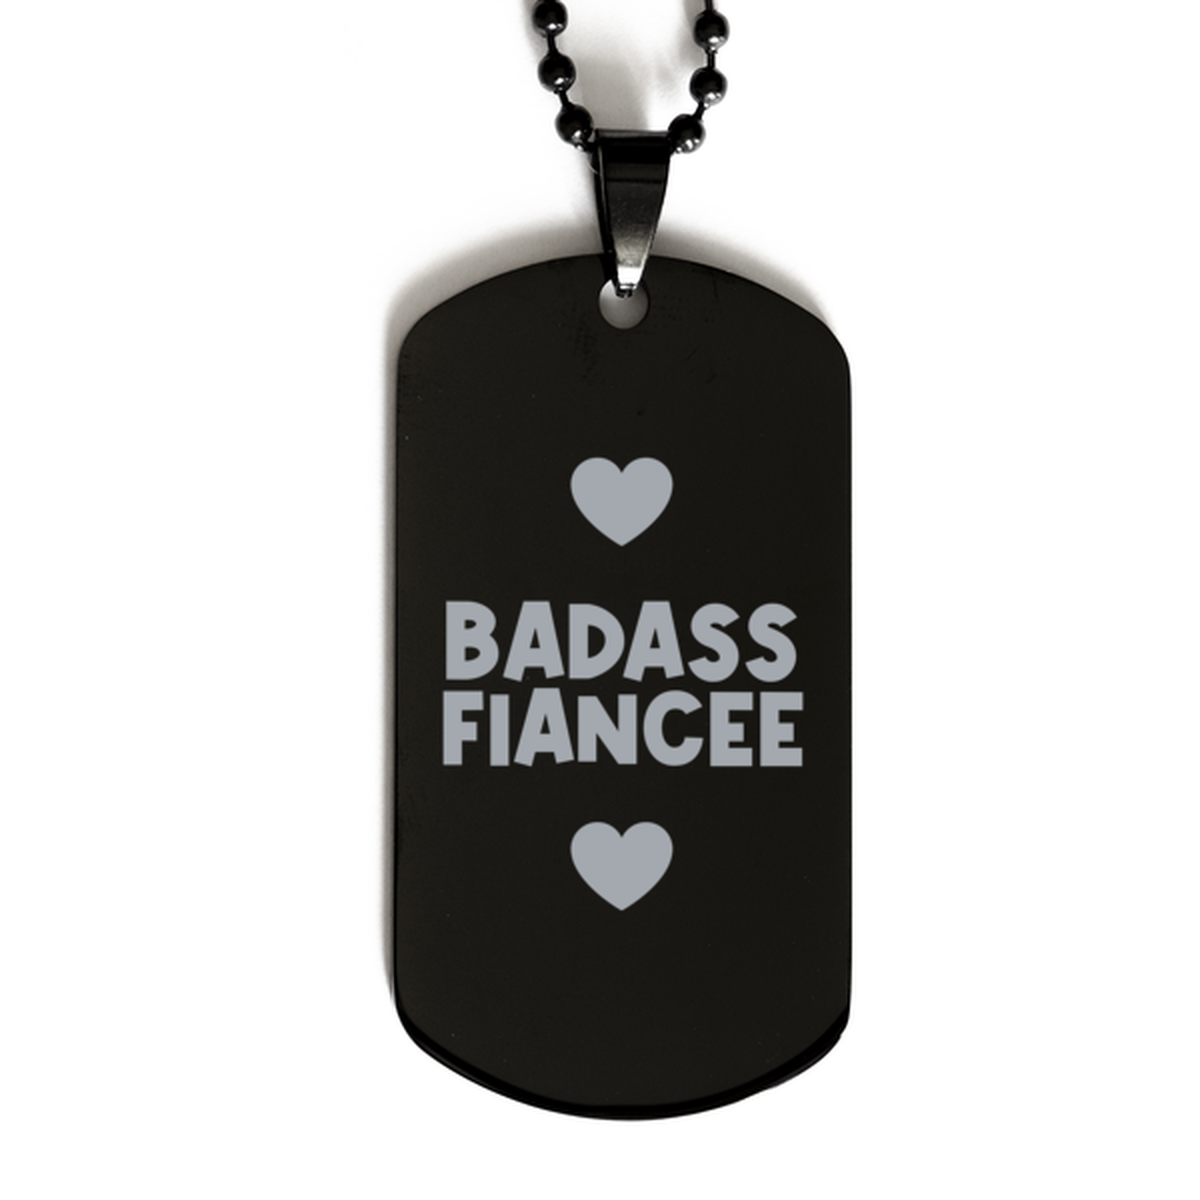 Fiancee Black Dog Tag, Badass Fiancee, Funny Family Gifts  Necklace For Fiancee From Fiance